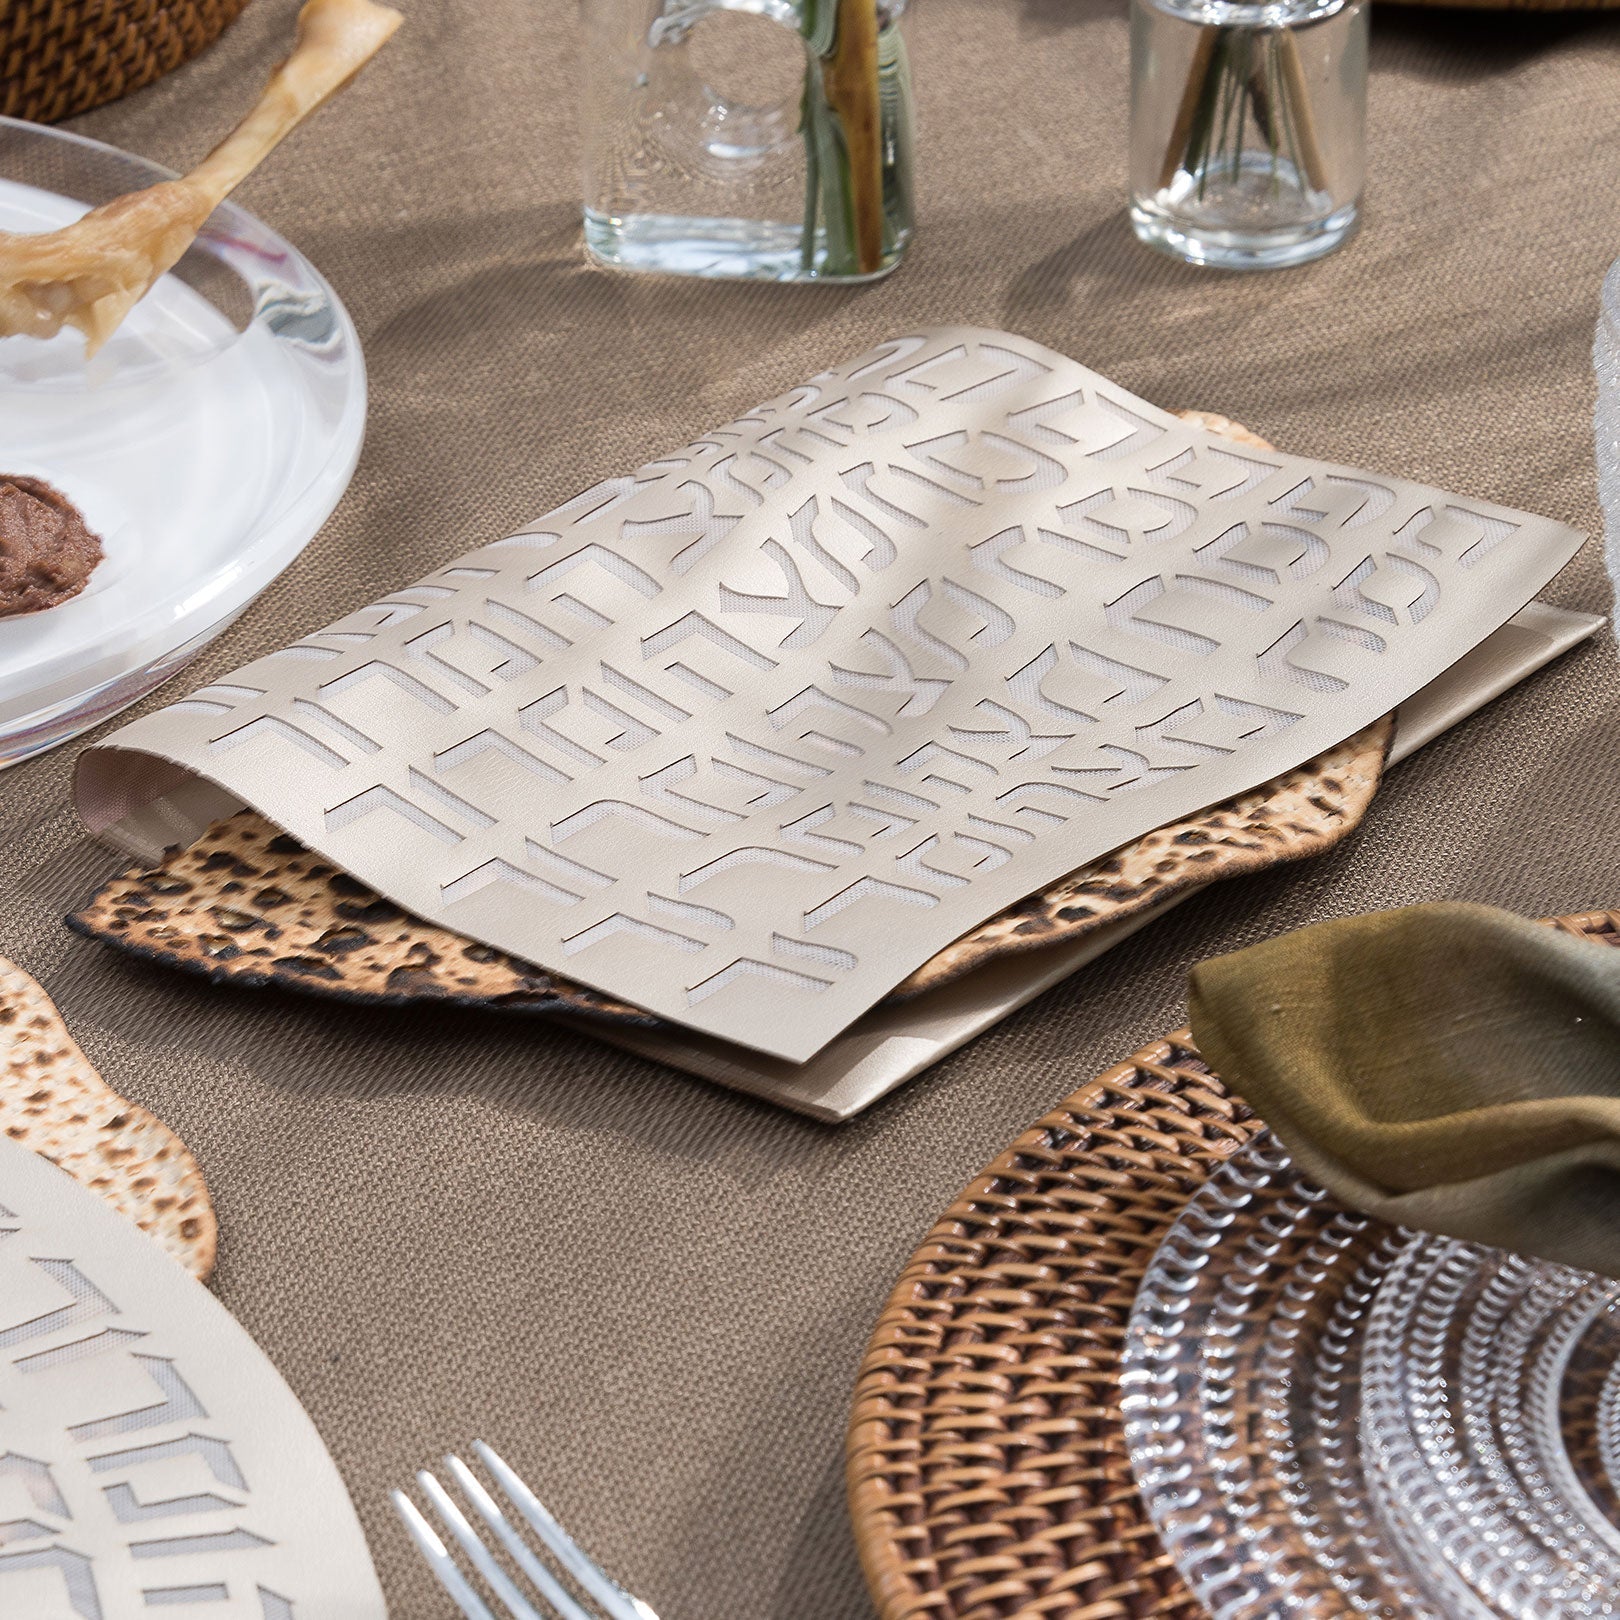 Passover Bundle: White Plate / Type Champagne